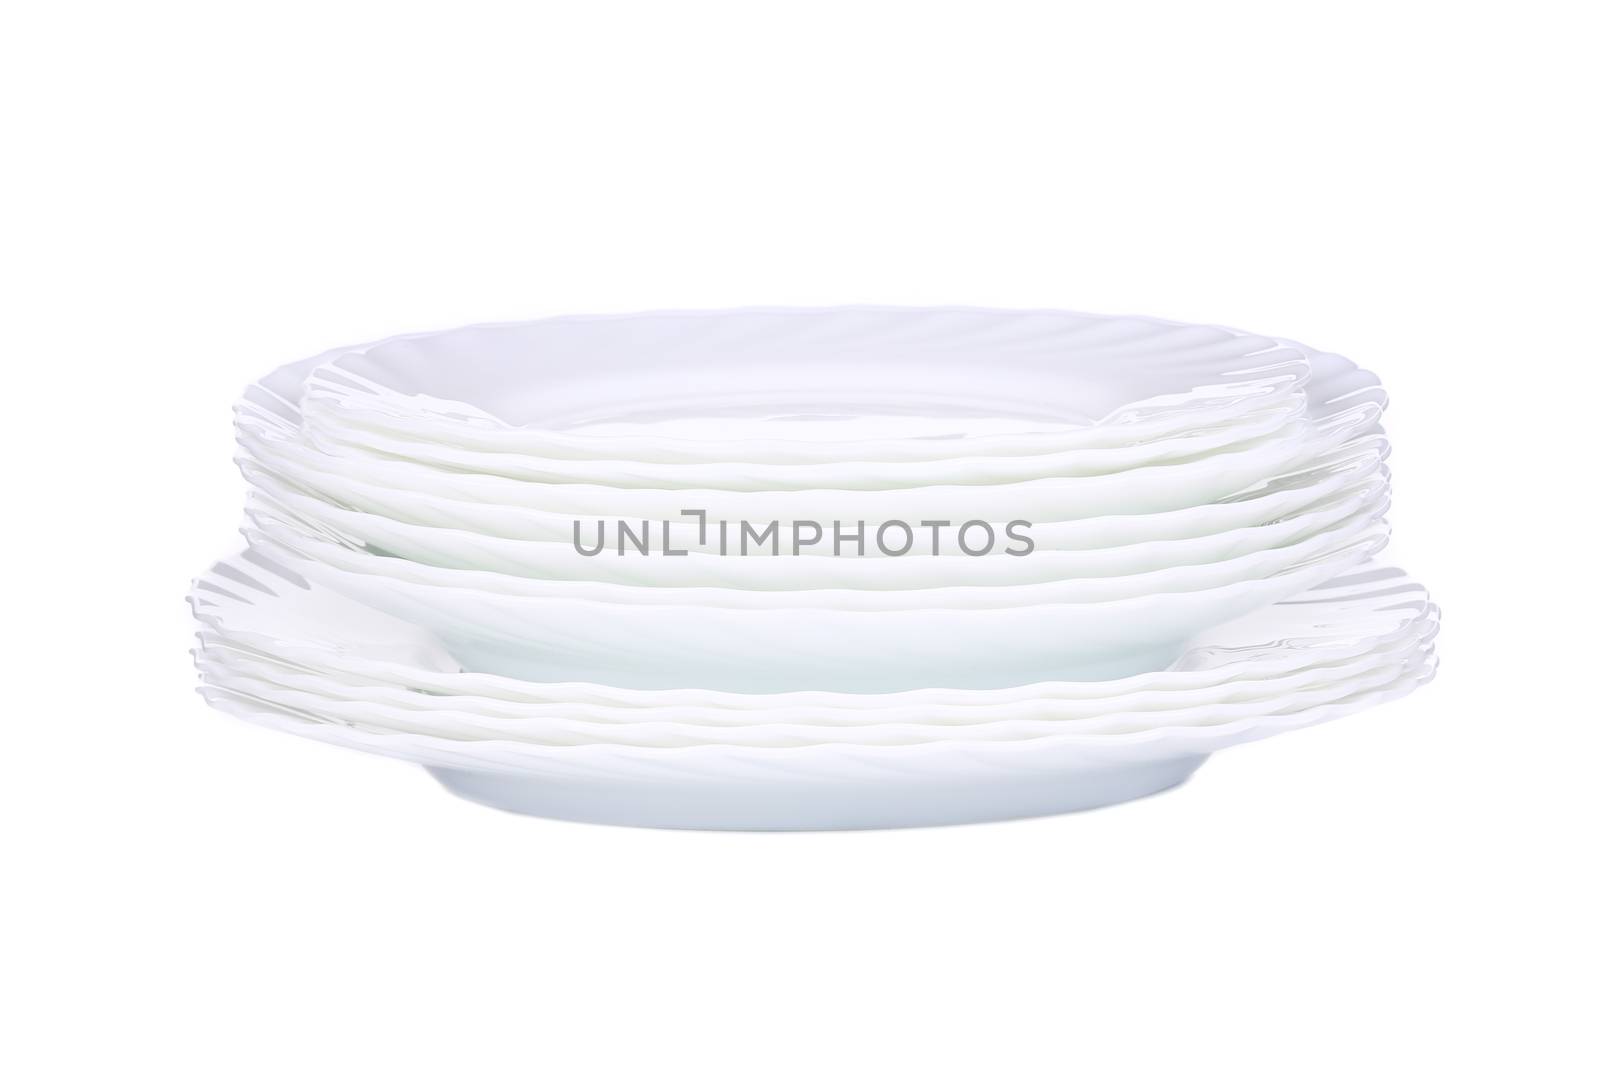 Stack of new clean white plates. Isolated on a white background.